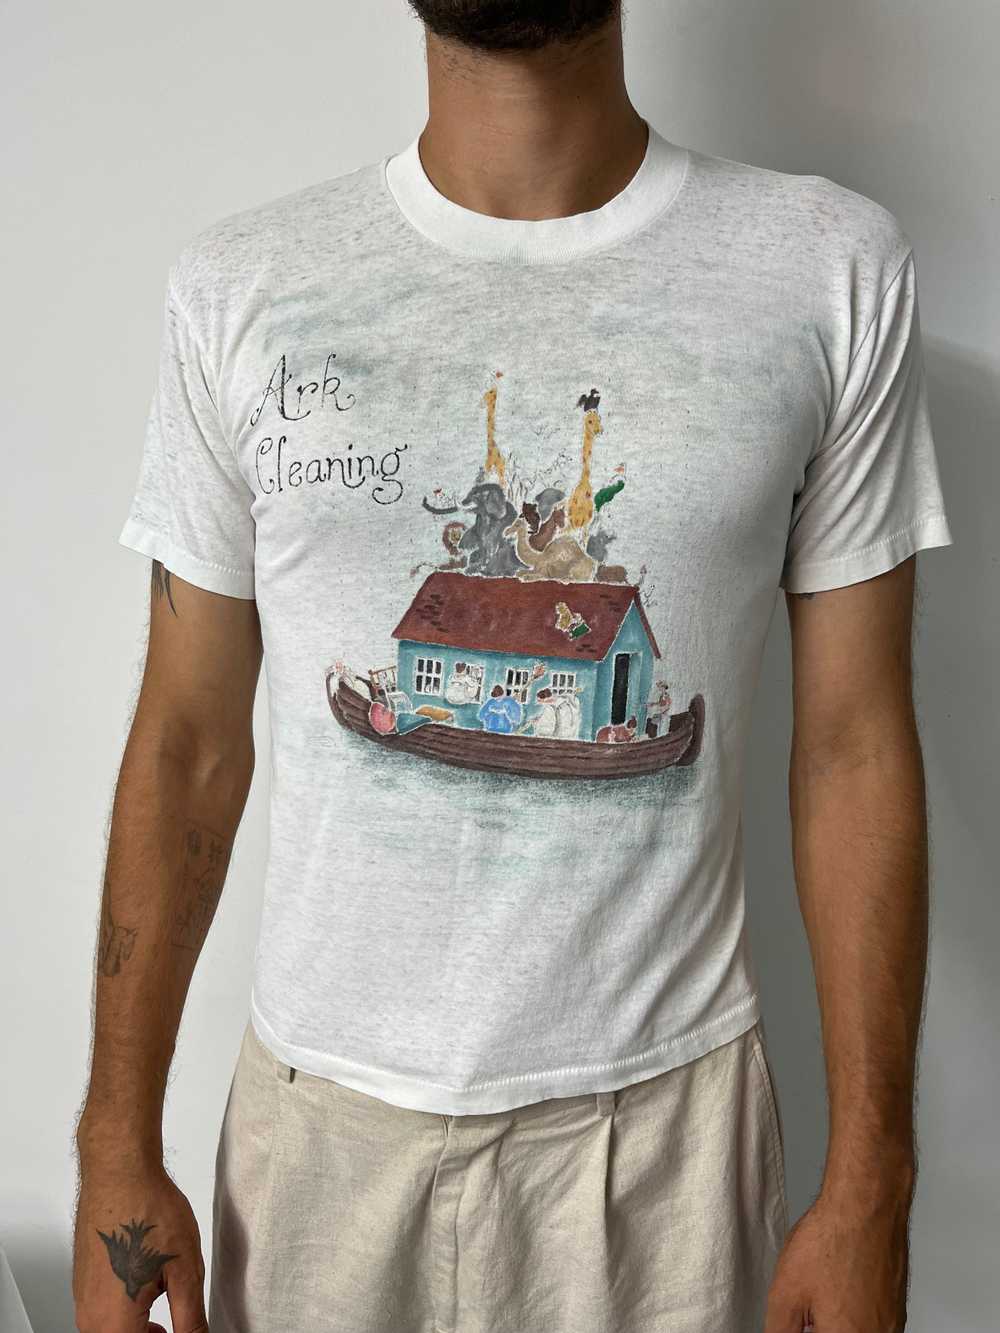 ‘70s Ark Cleaning Hand-Painted Graphic T-Shirt - … - image 2